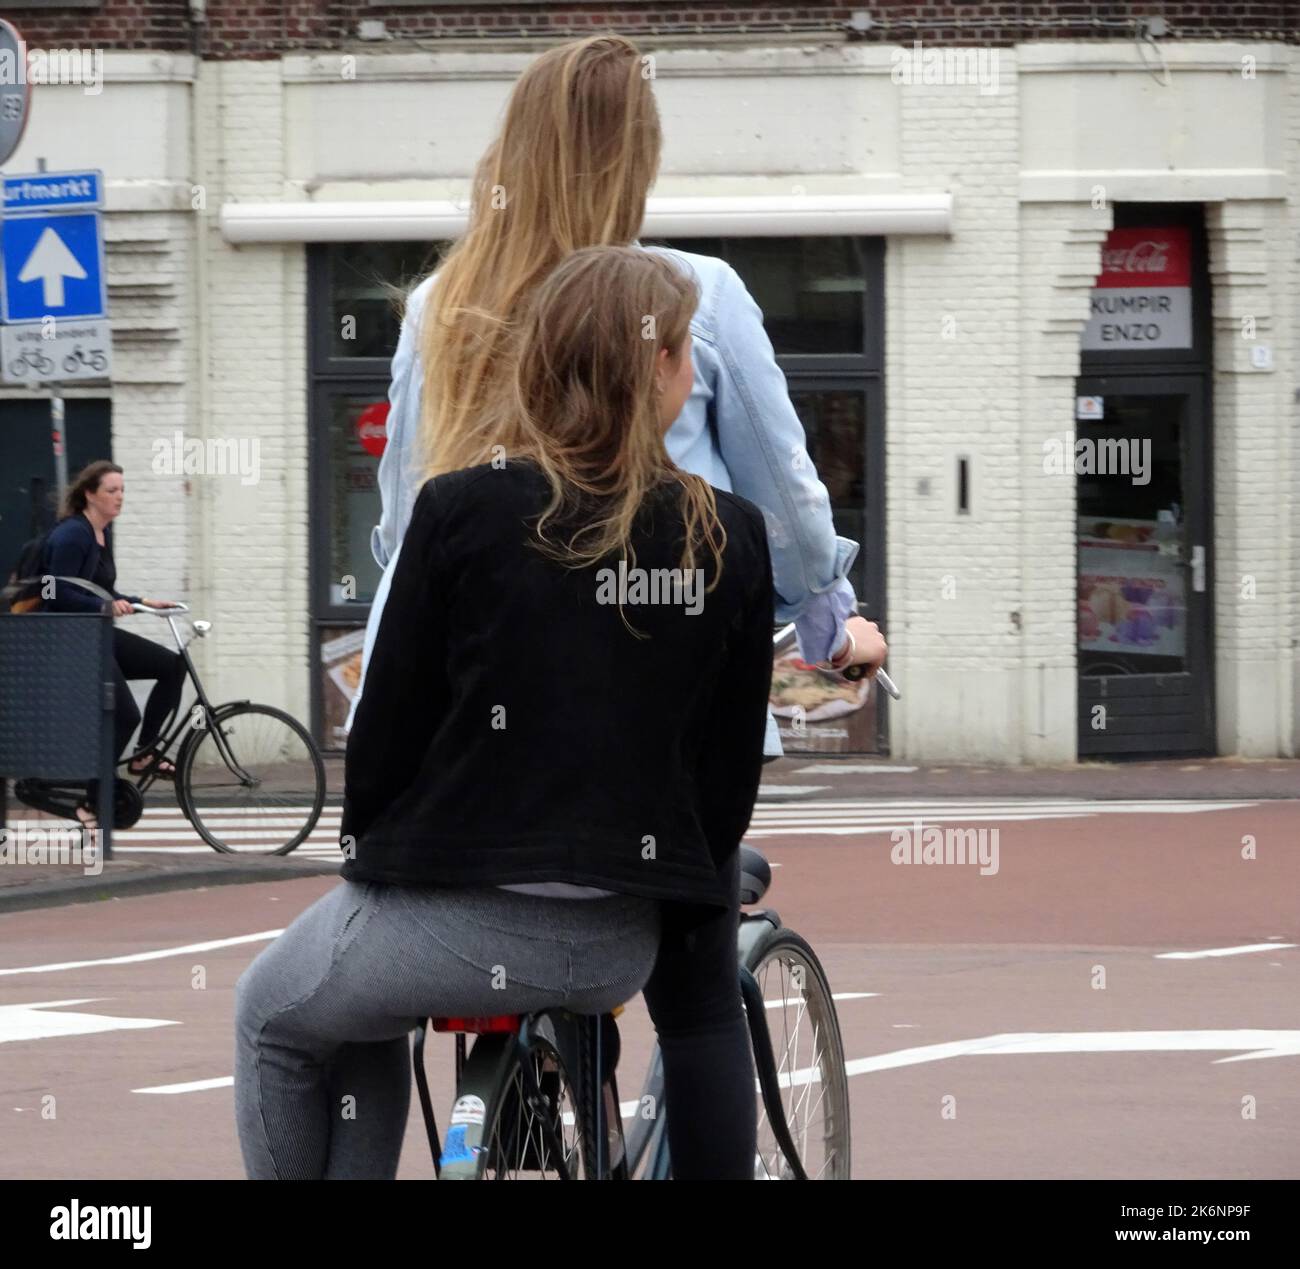 Leiden, the Netherlands - July 8 2016 Two Dutch girls on a bicycle. One is cycling, the other is sitting on the bicycle rack. Stock Photo